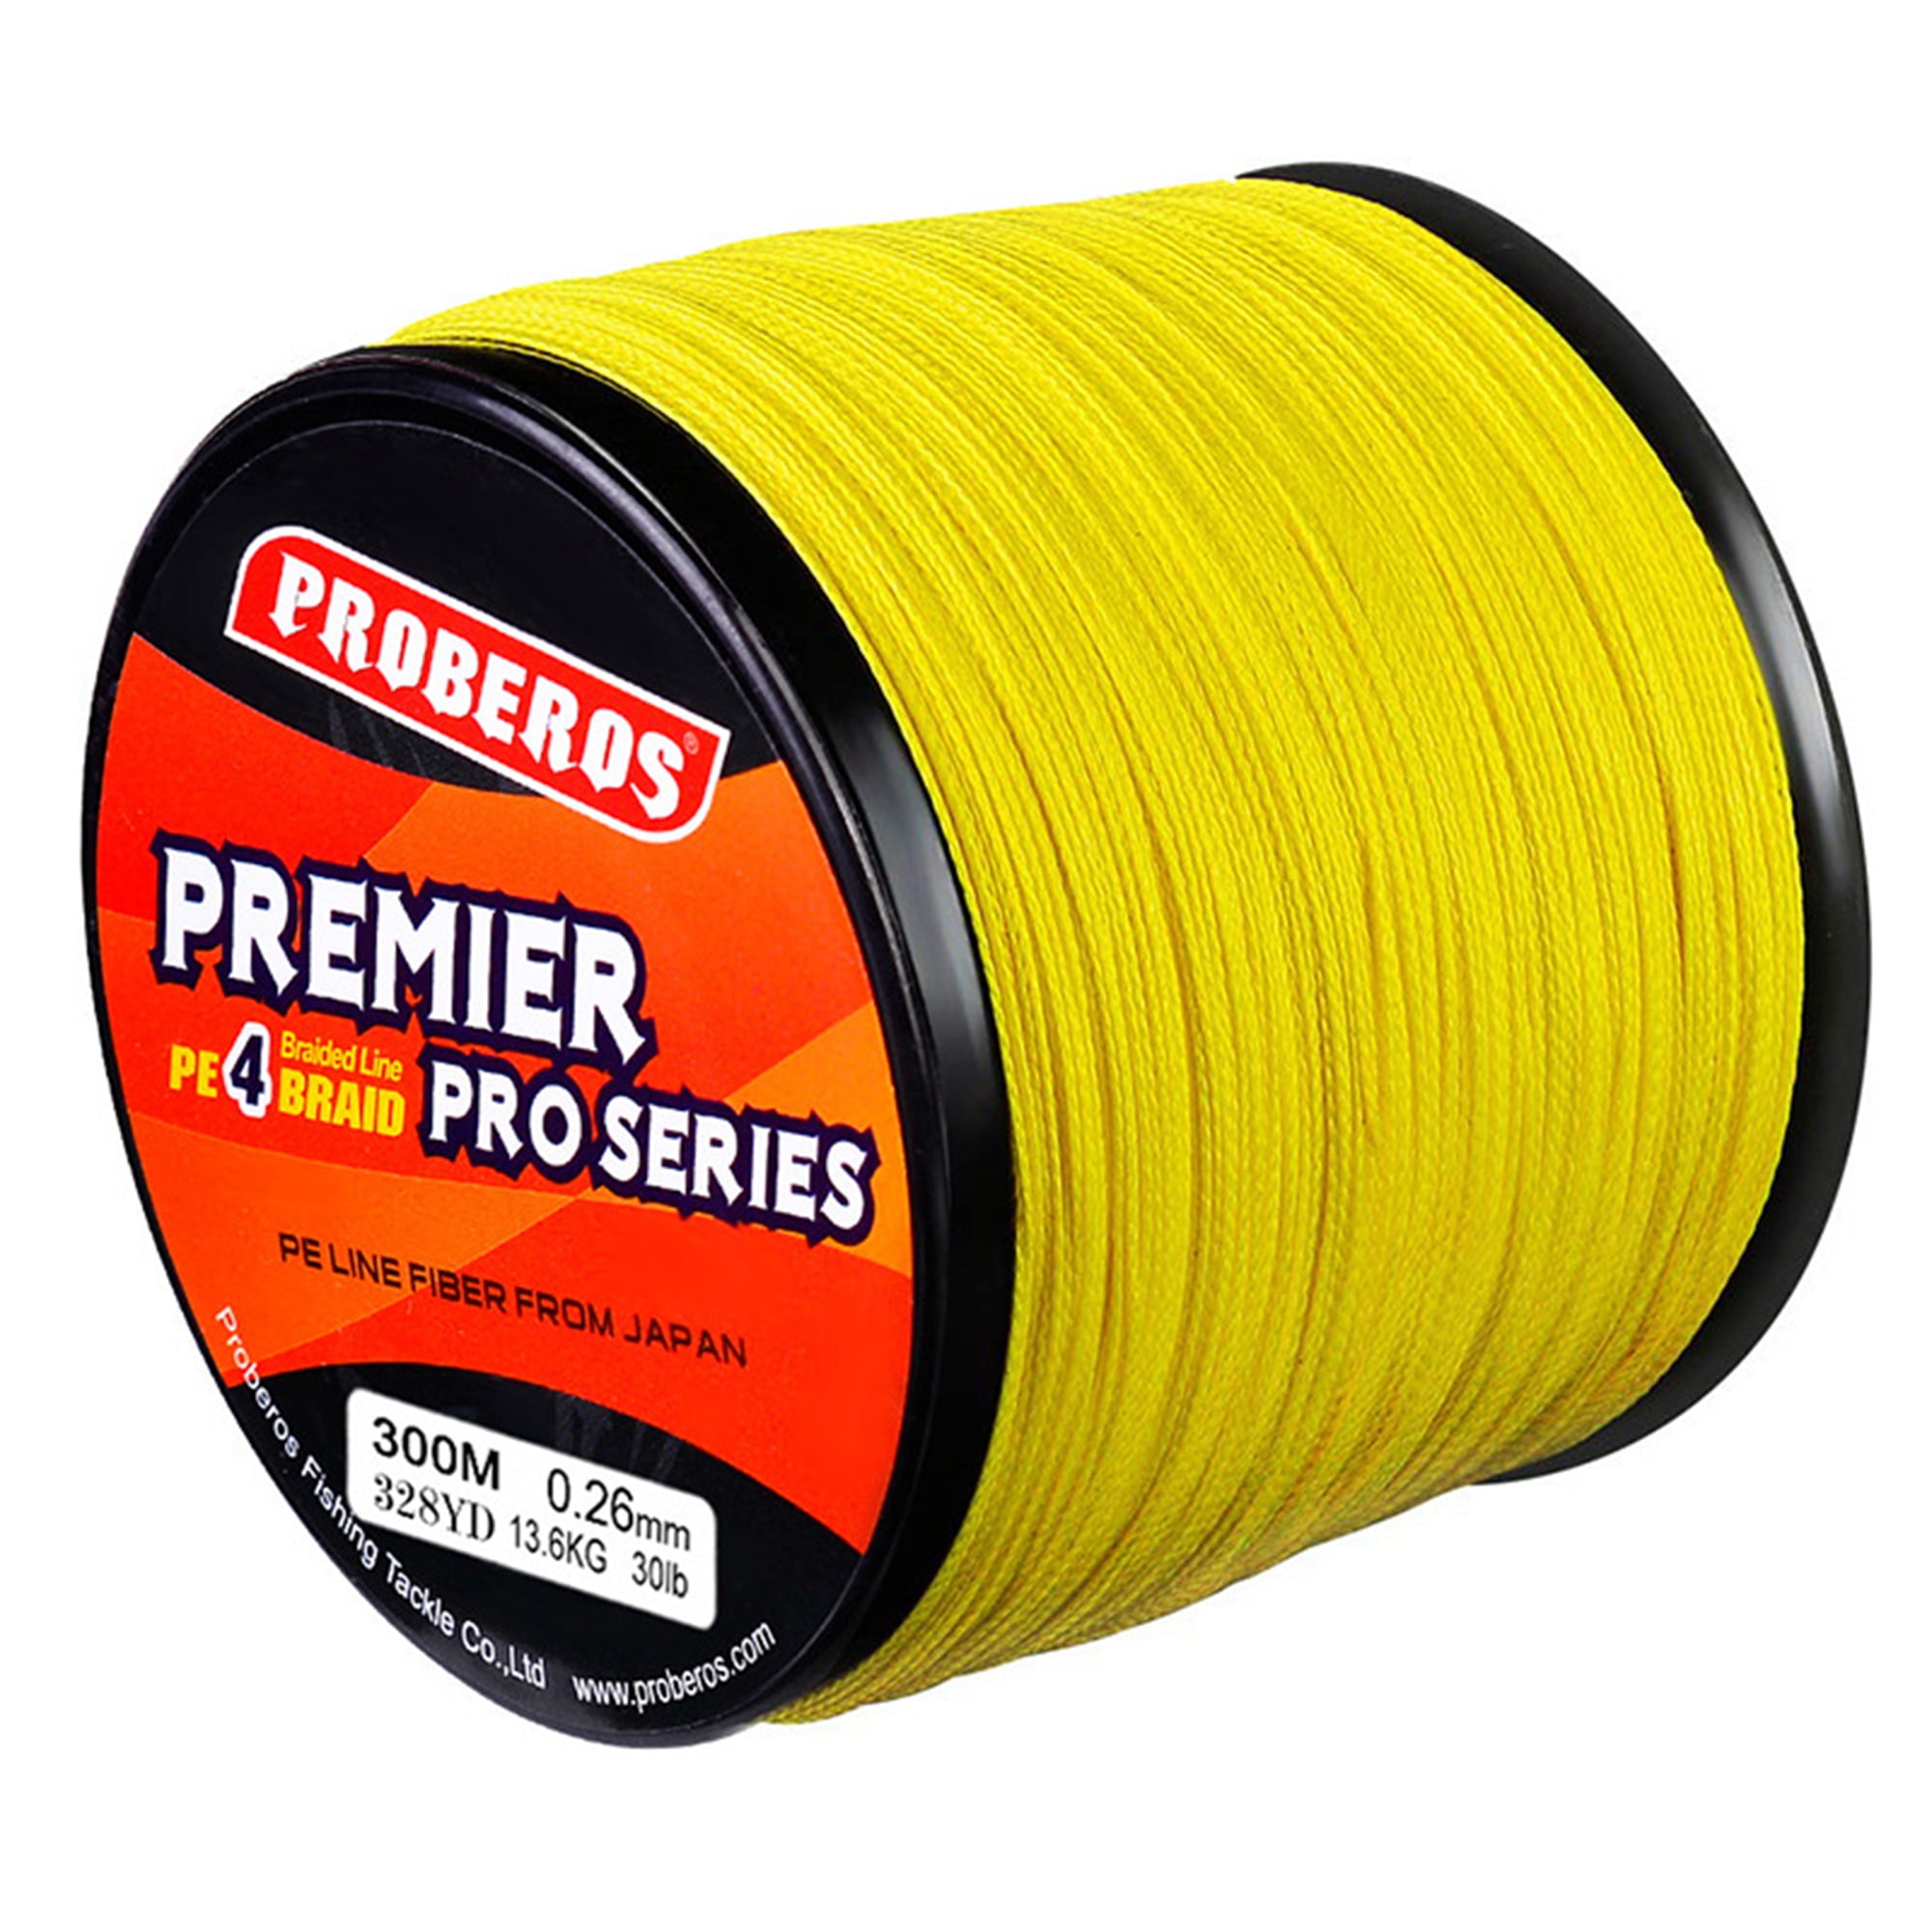 300M Strong Spectra Braided Fishing Line 100% PE Premium 4 Strands 6-100LB  High Strength 